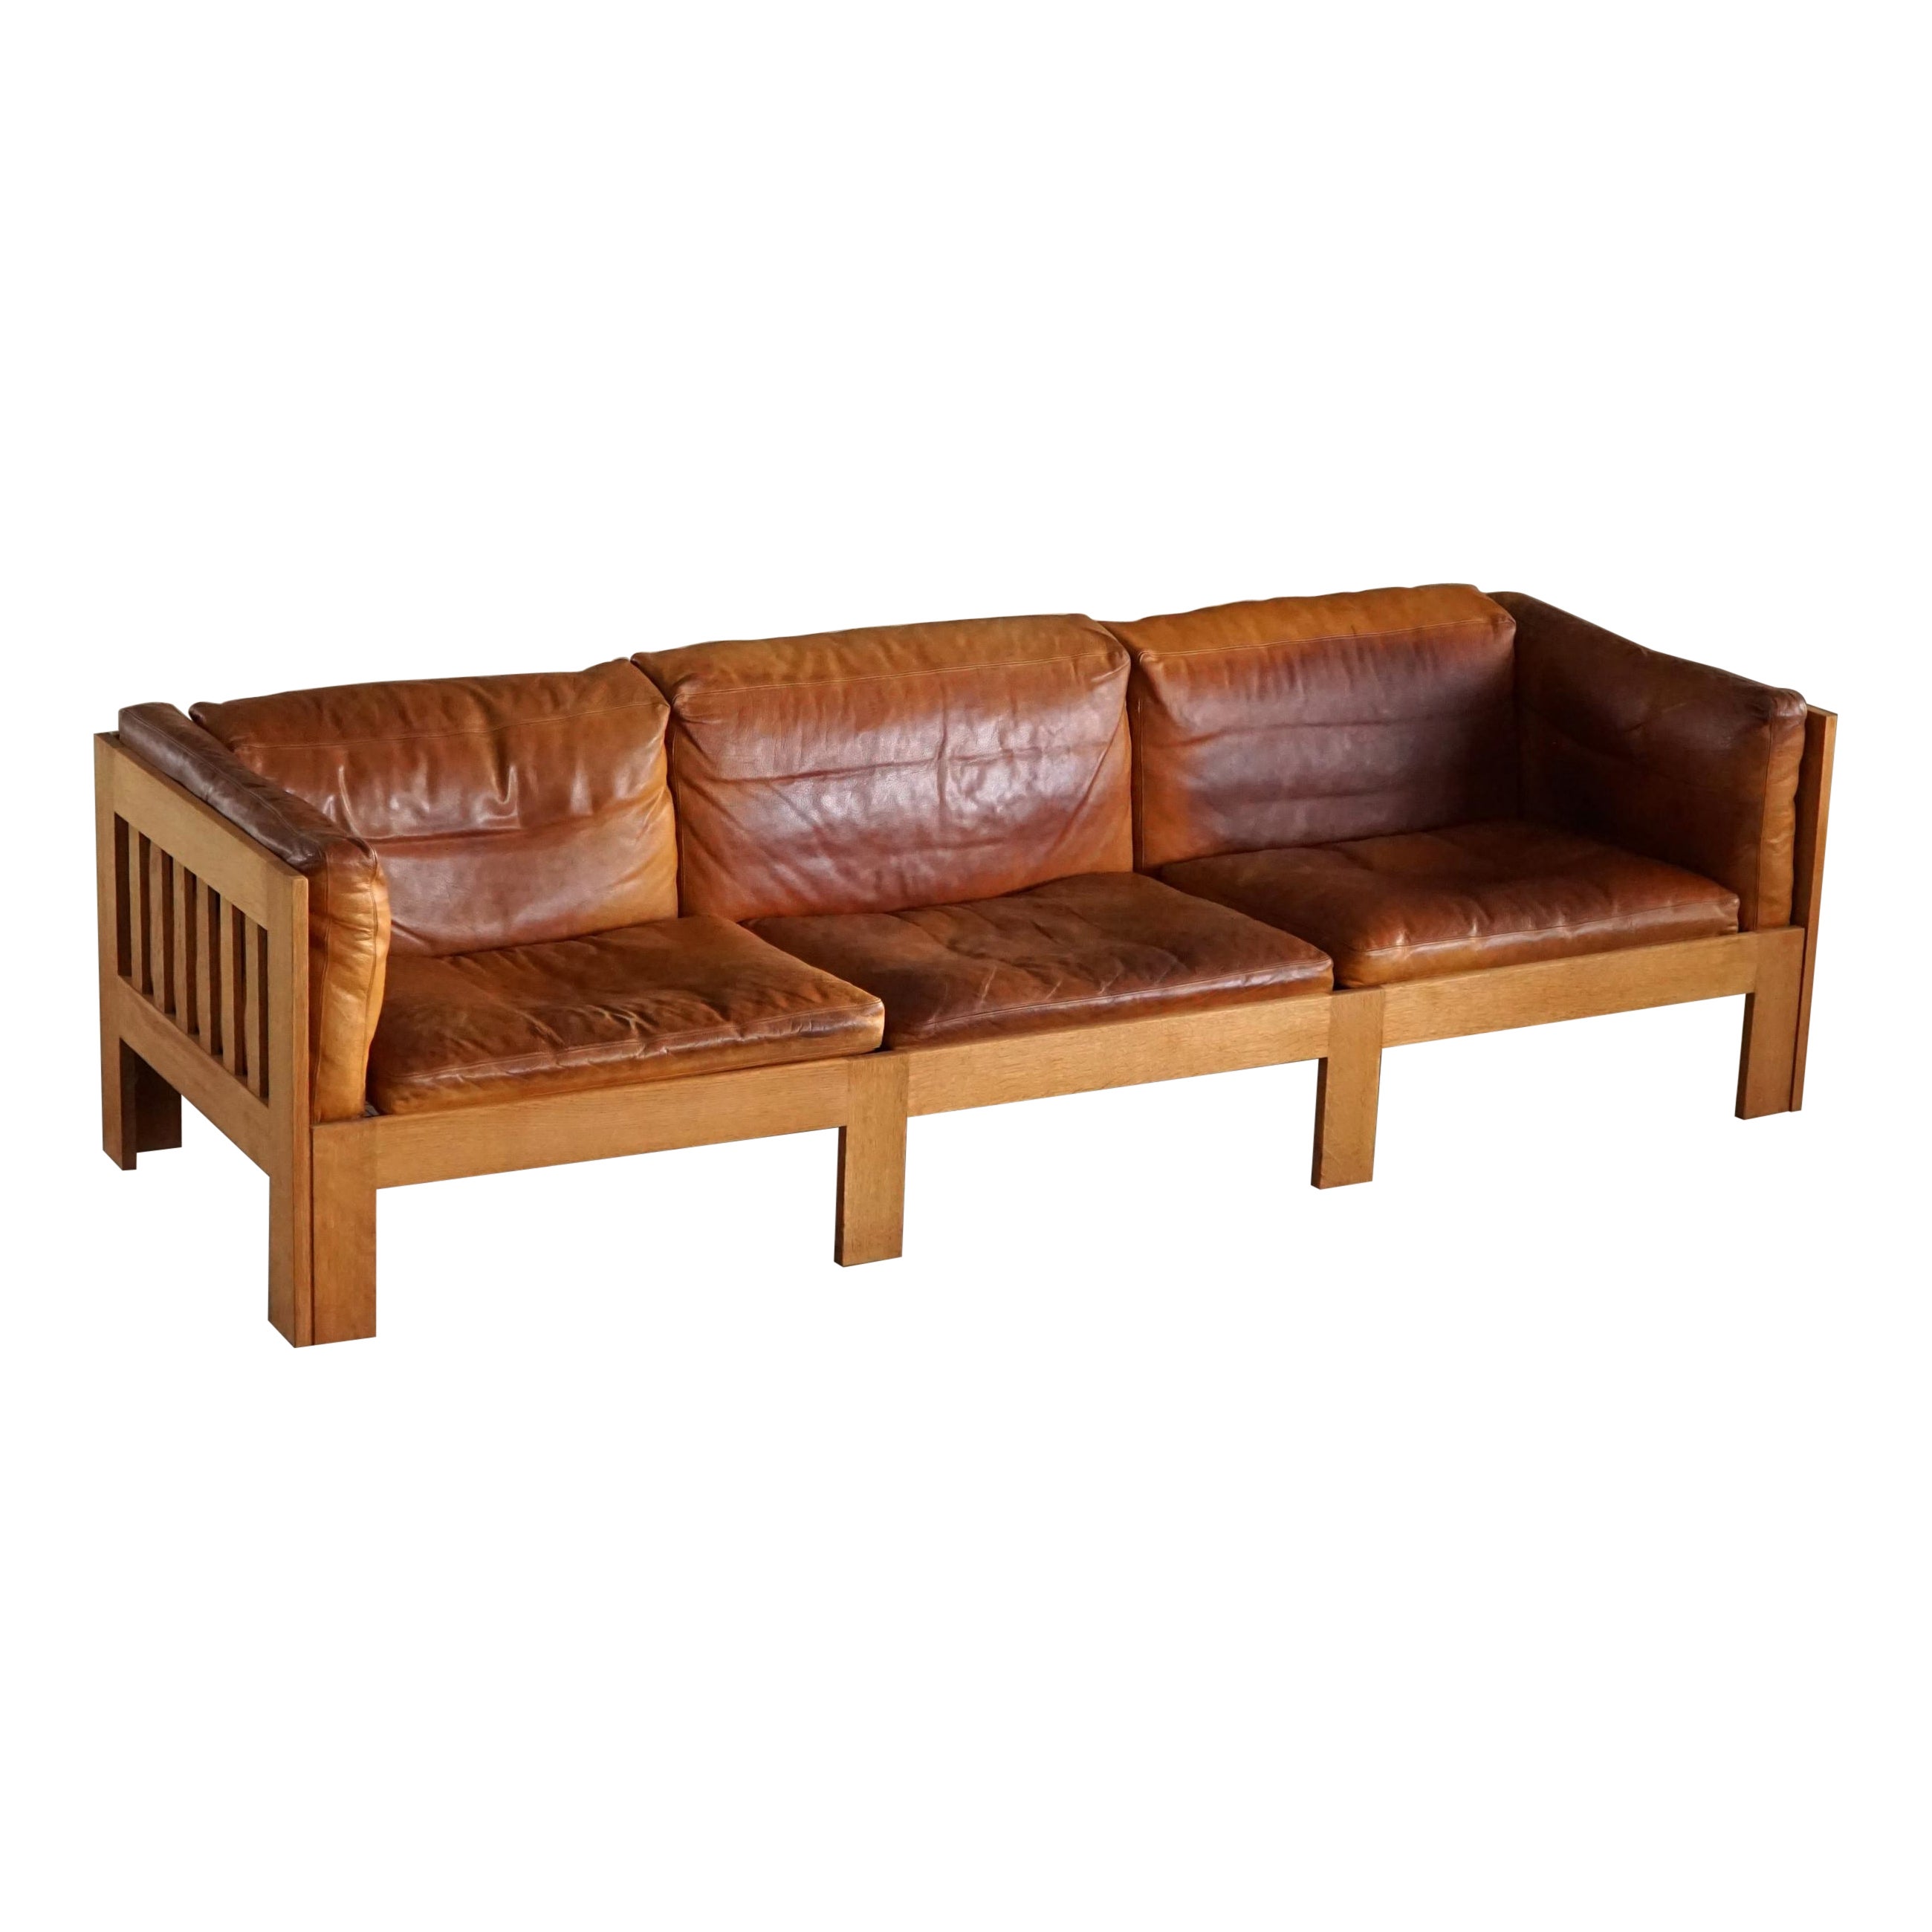 Danish Mid Century Sofa in Patinated Leather, Oak Frame, by Tage Poulsen, 1960s